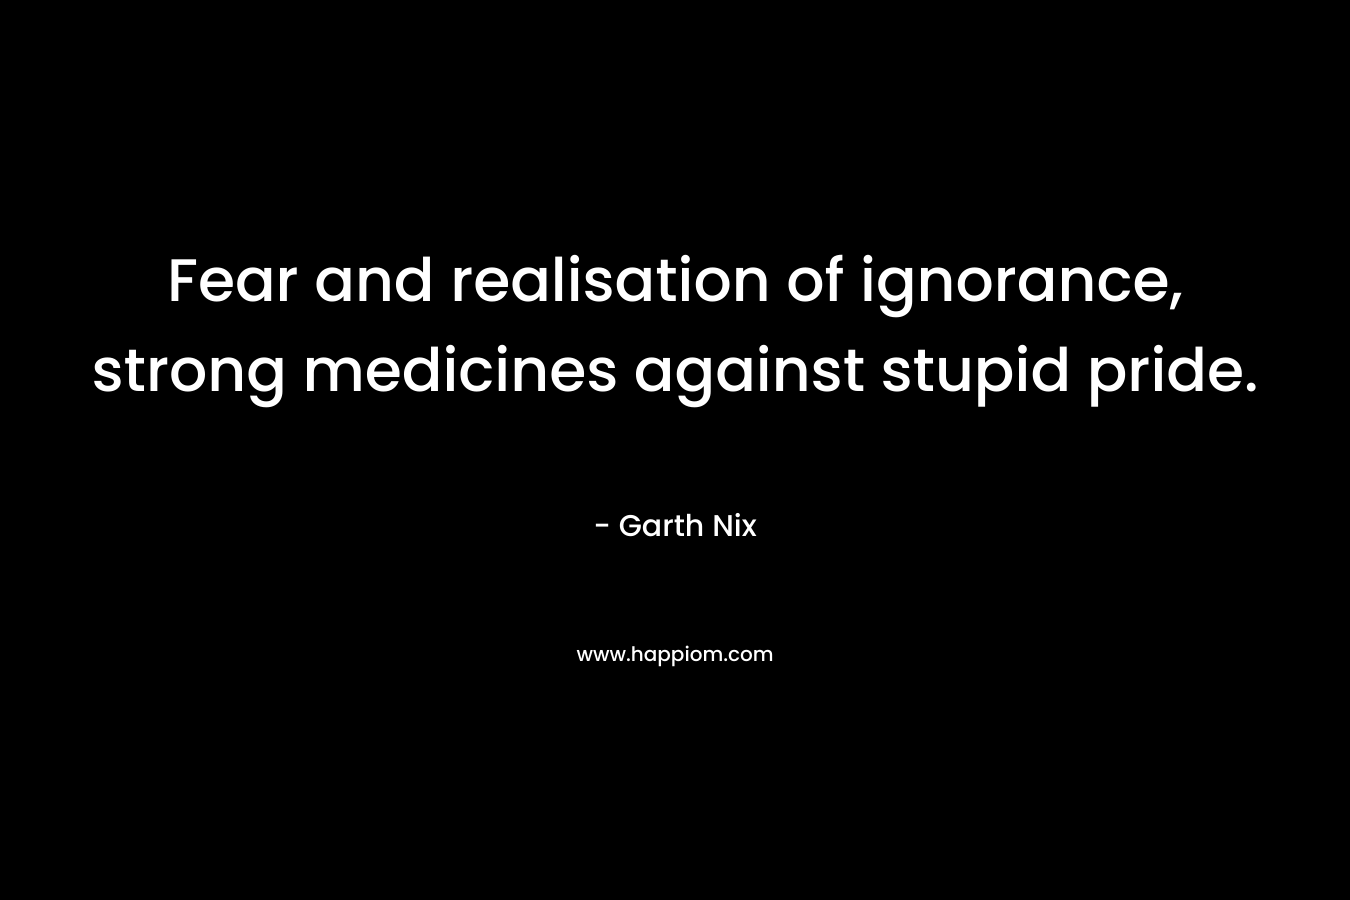 Fear and realisation of ignorance, strong medicines against stupid pride.